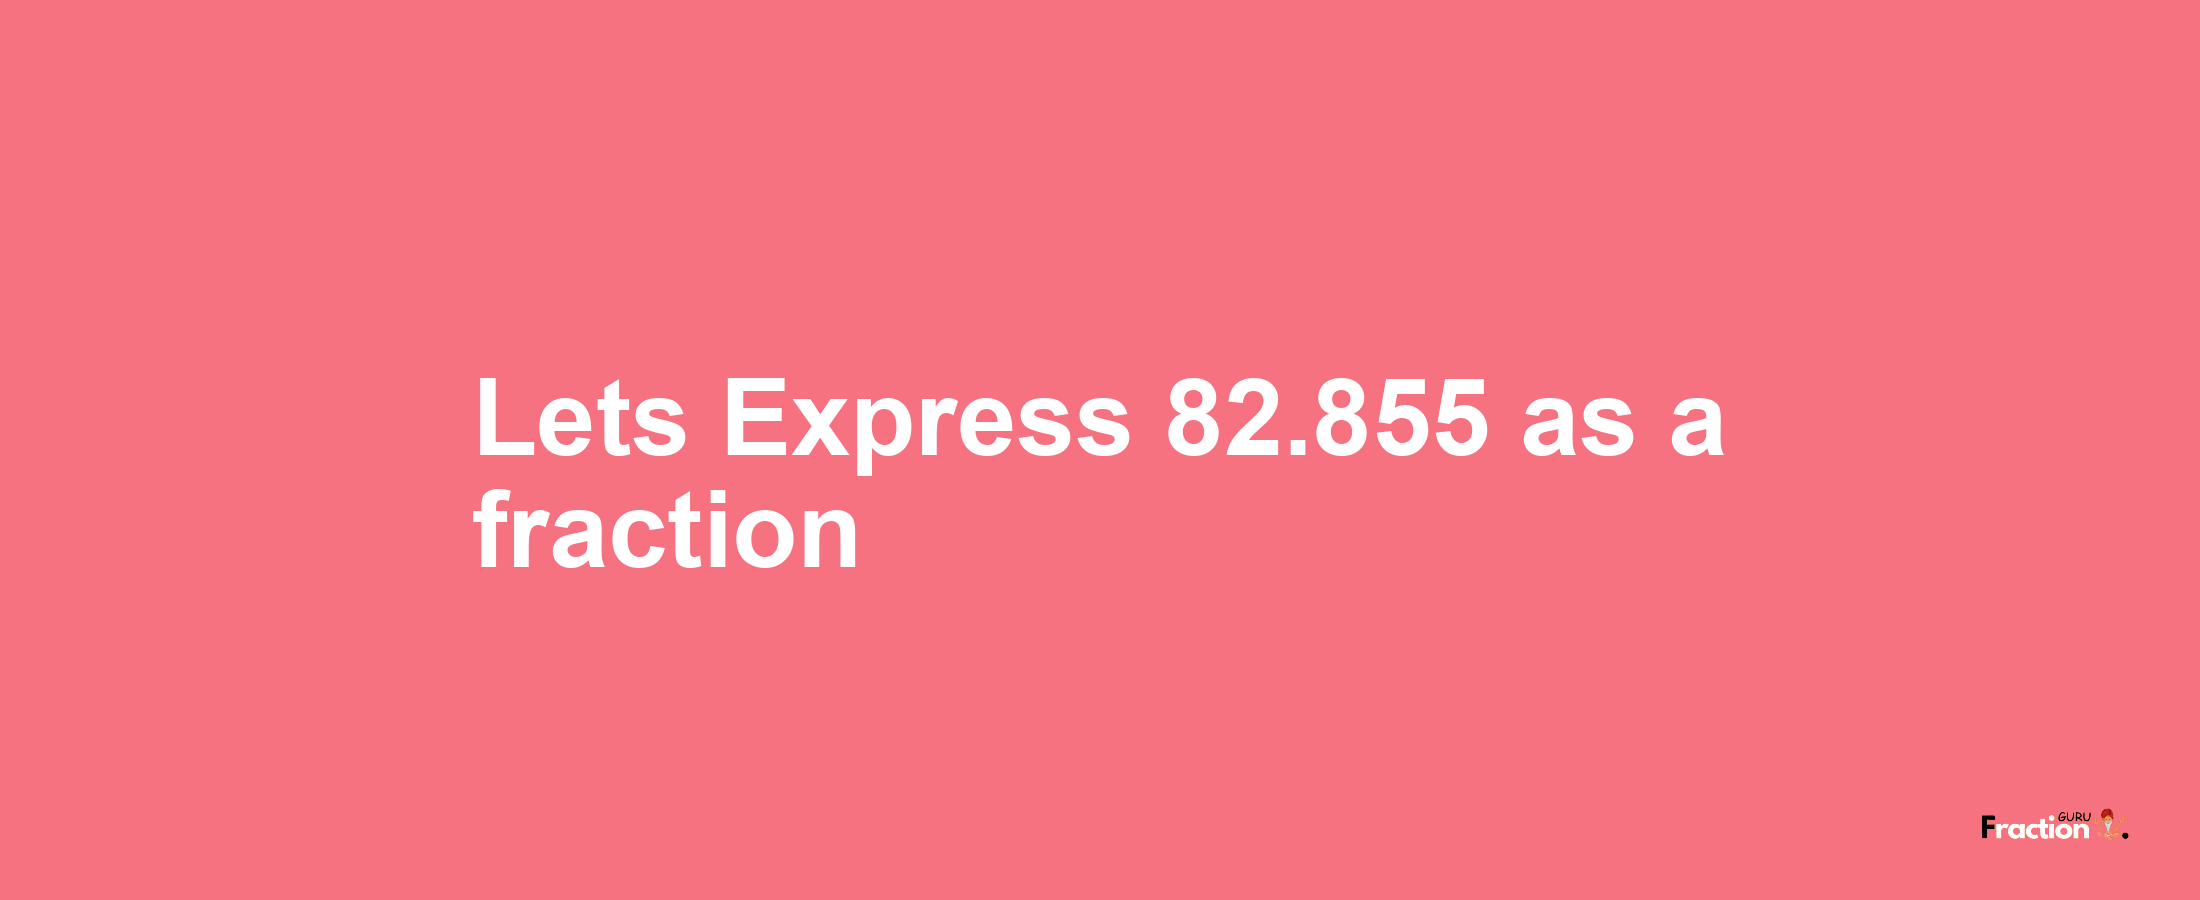 Lets Express 82.855 as afraction